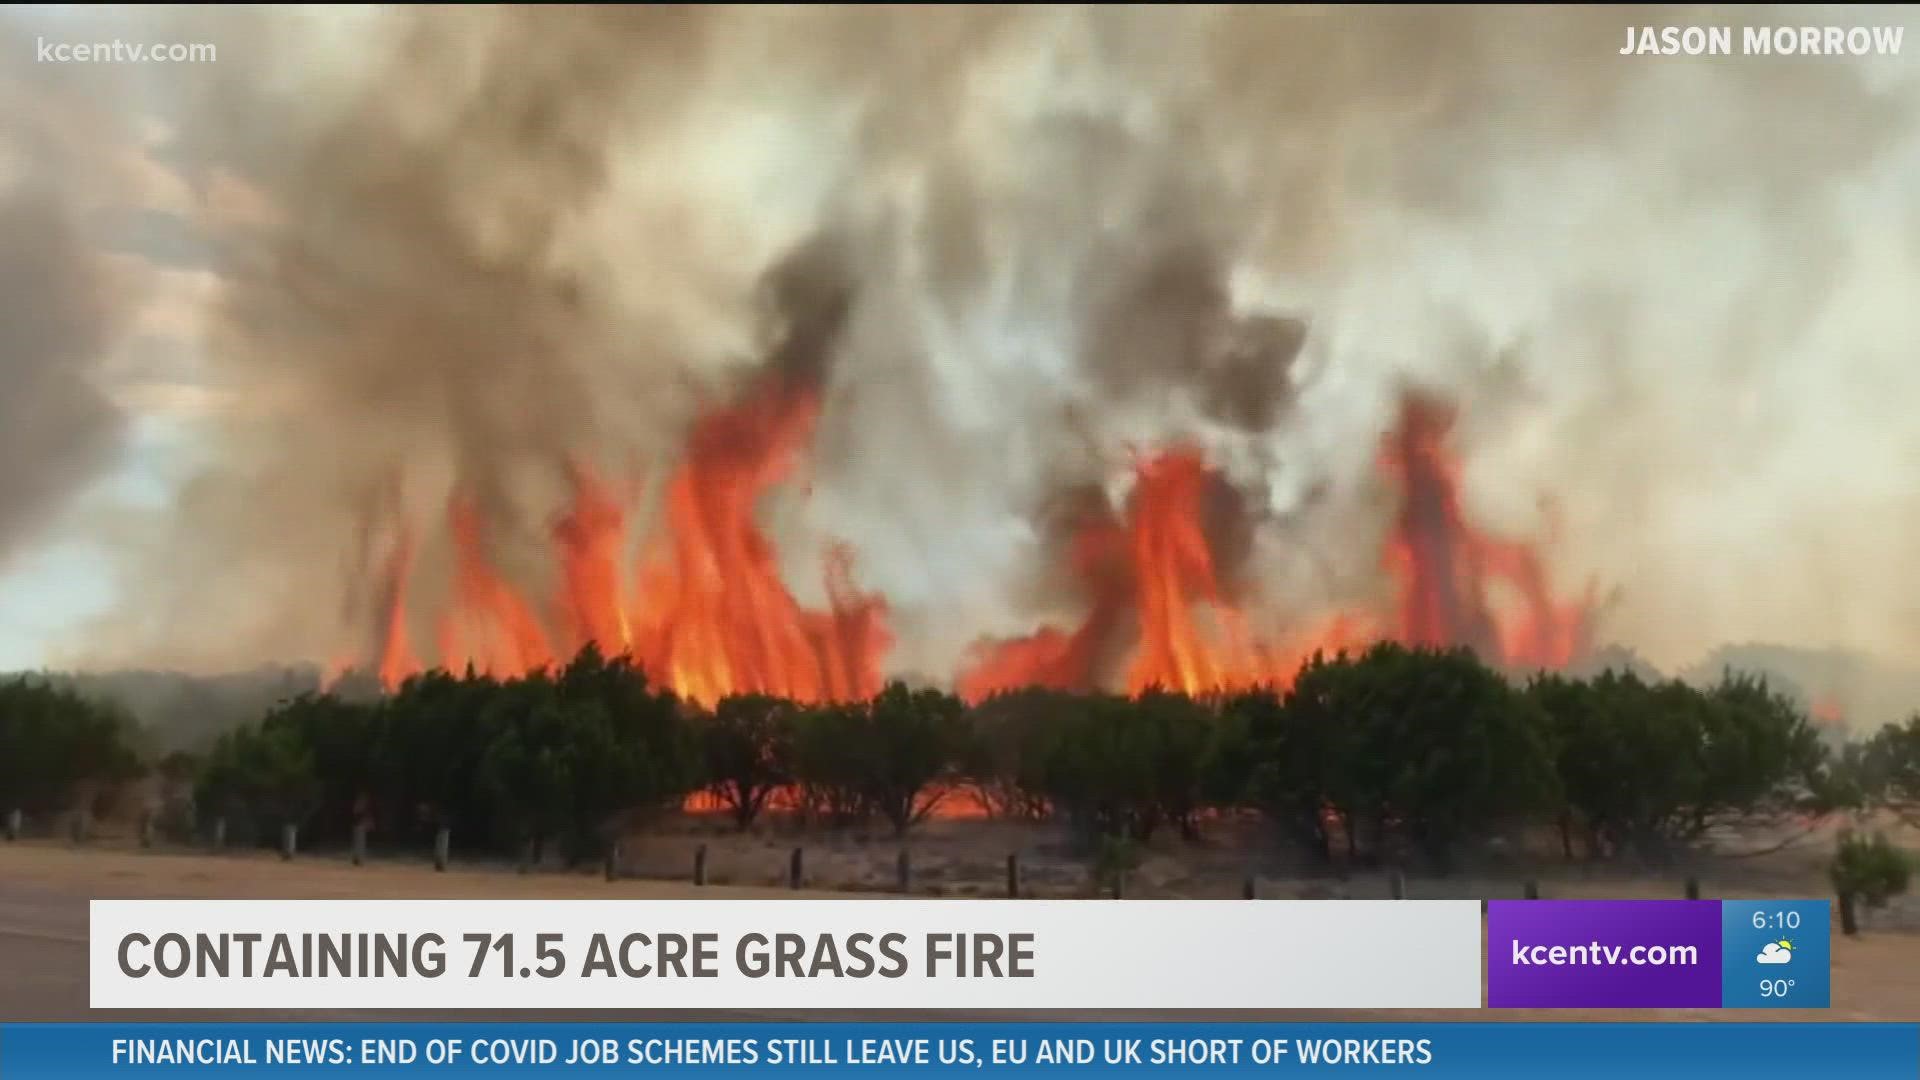 The 72-acre fire reached some area residents' backyards.